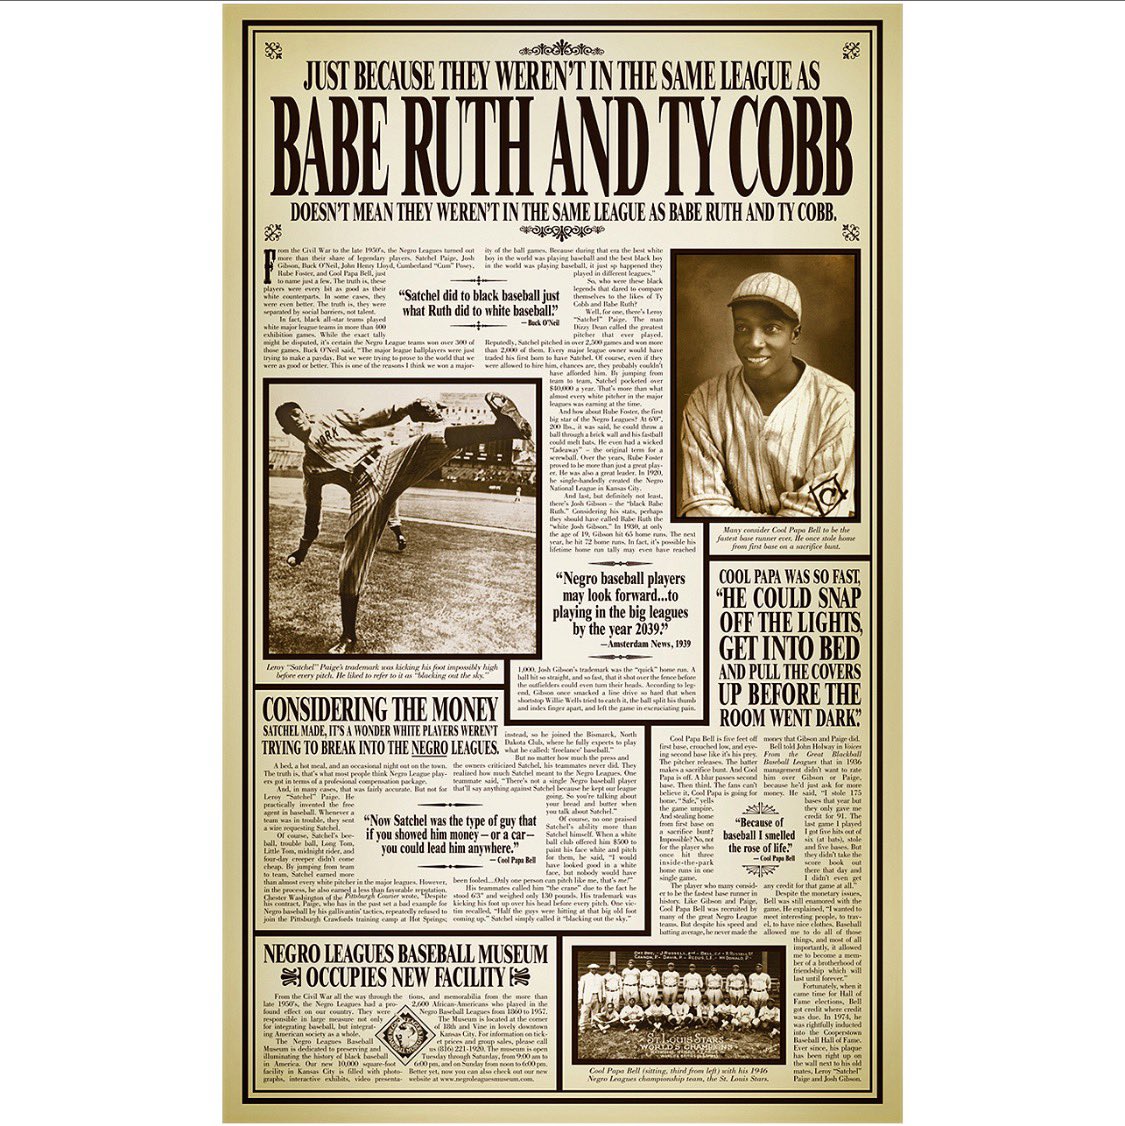 This award-winning poster, created by the @MartinAgency for the grand opening of the @NLBMuseumKC in 1997, seems appropriate with yesterday’s announcement of the stats of the Negro Leagues being officially entered into the record books of @MLB! @MLBNetworkRadio @Royals @sn_mlb